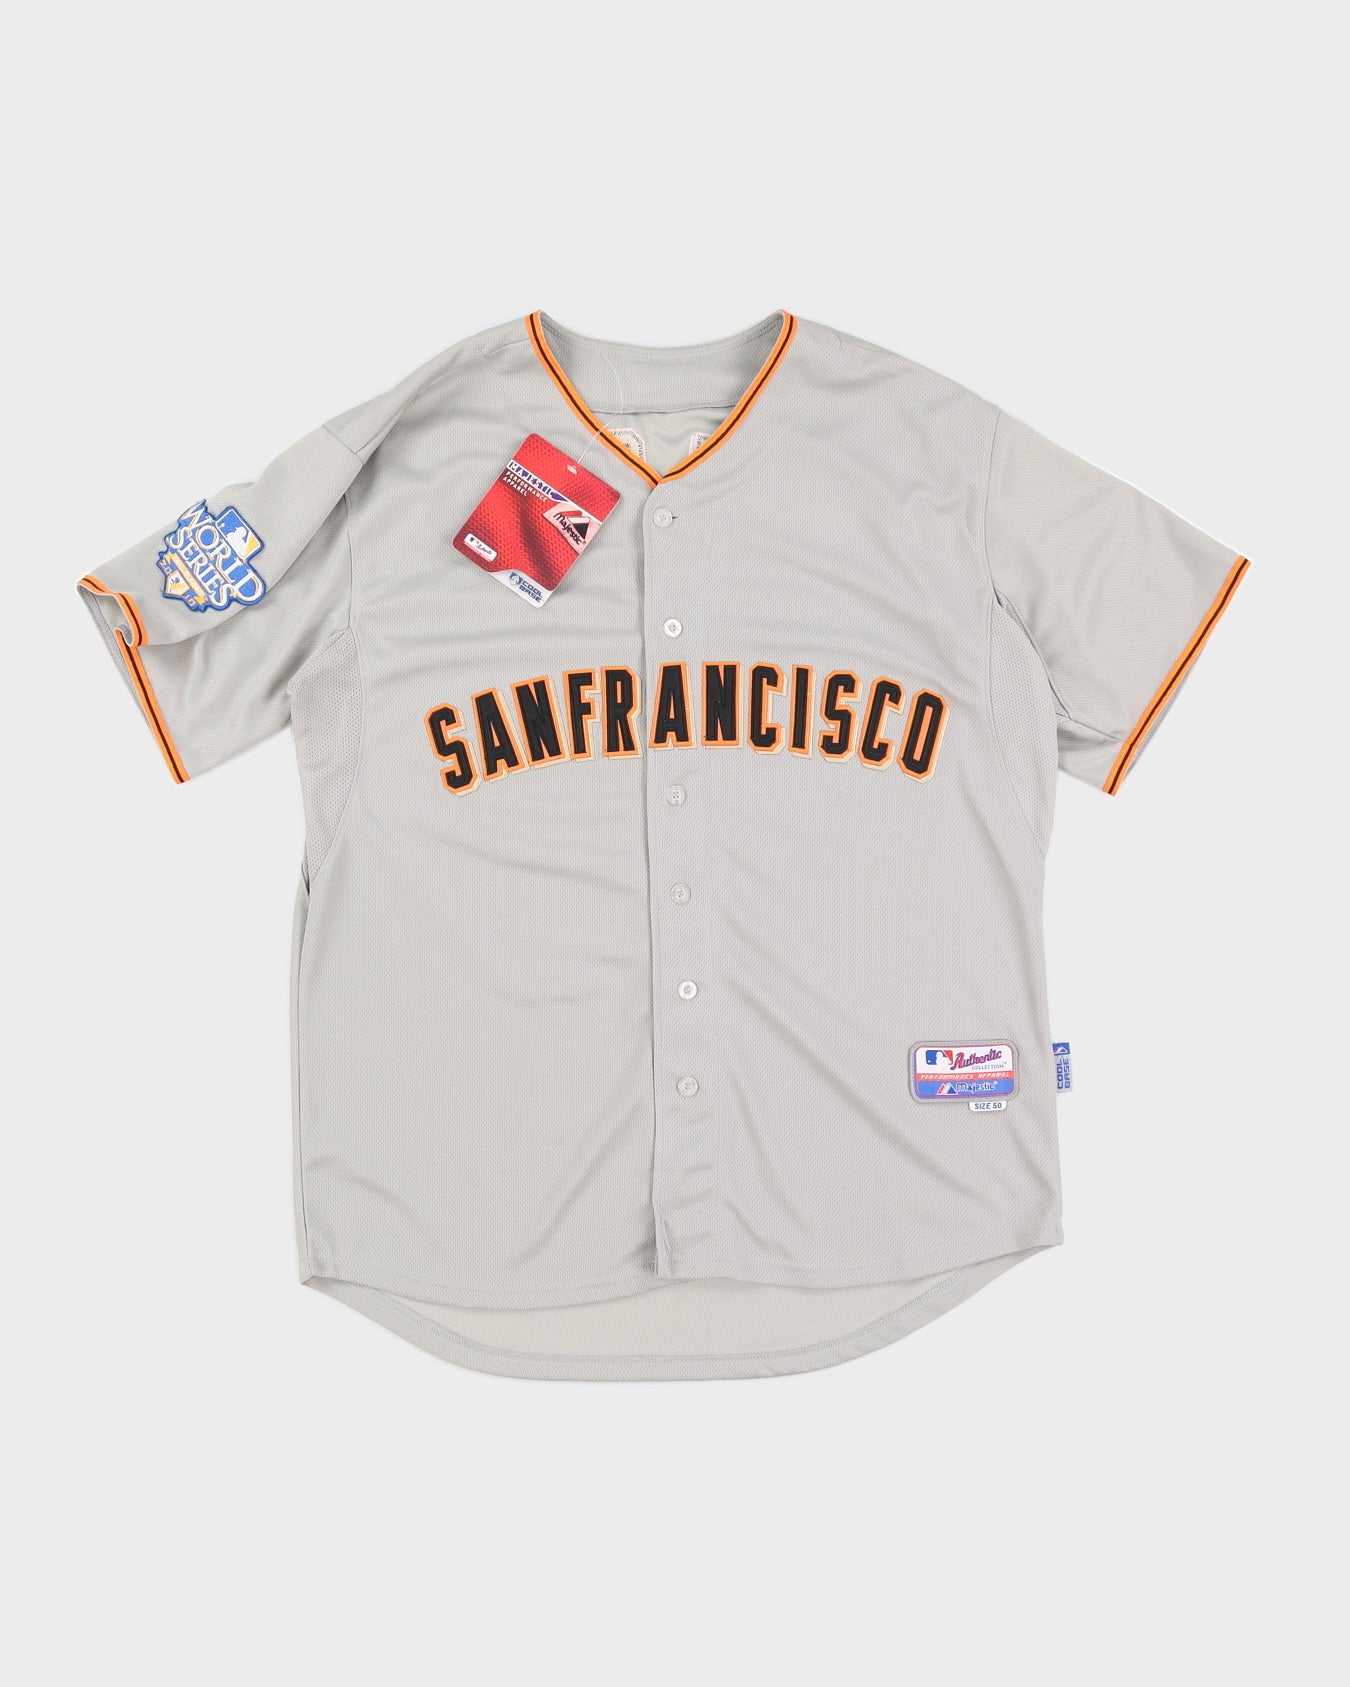 MLB Majestic San Francisco Giants Grey Wilson #38 2010 World Series Jersey Deadstock With Tags - XL